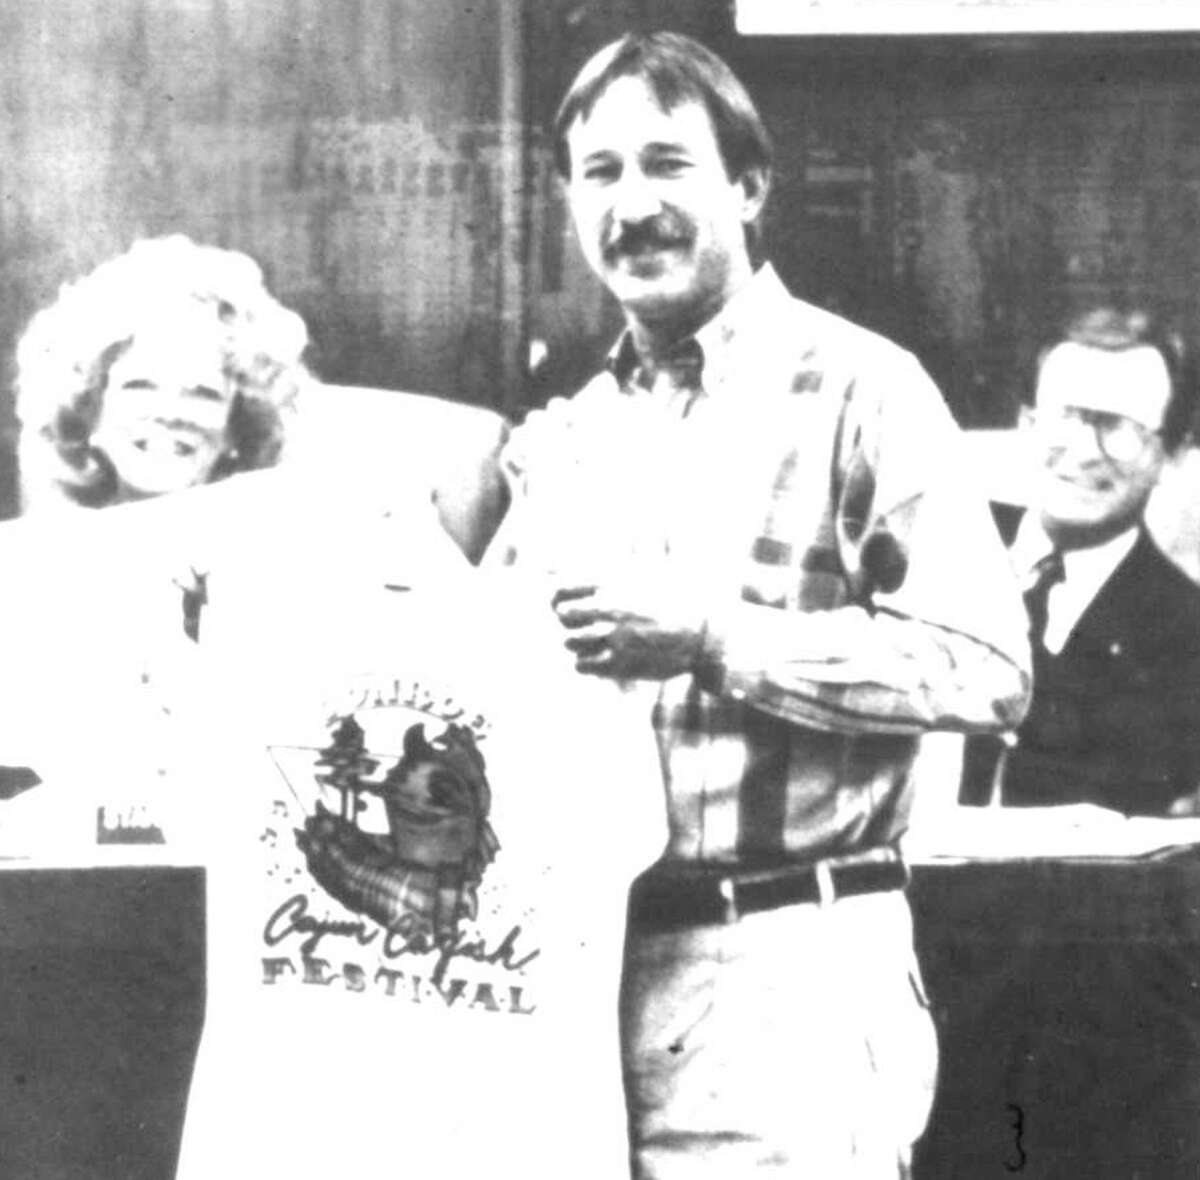 Richard Willis presents a Conroe Cajun Catfish Festival T-shirt to the Conroe City Council including Mayor Starlett Curry during the festival’s first year in 1990.